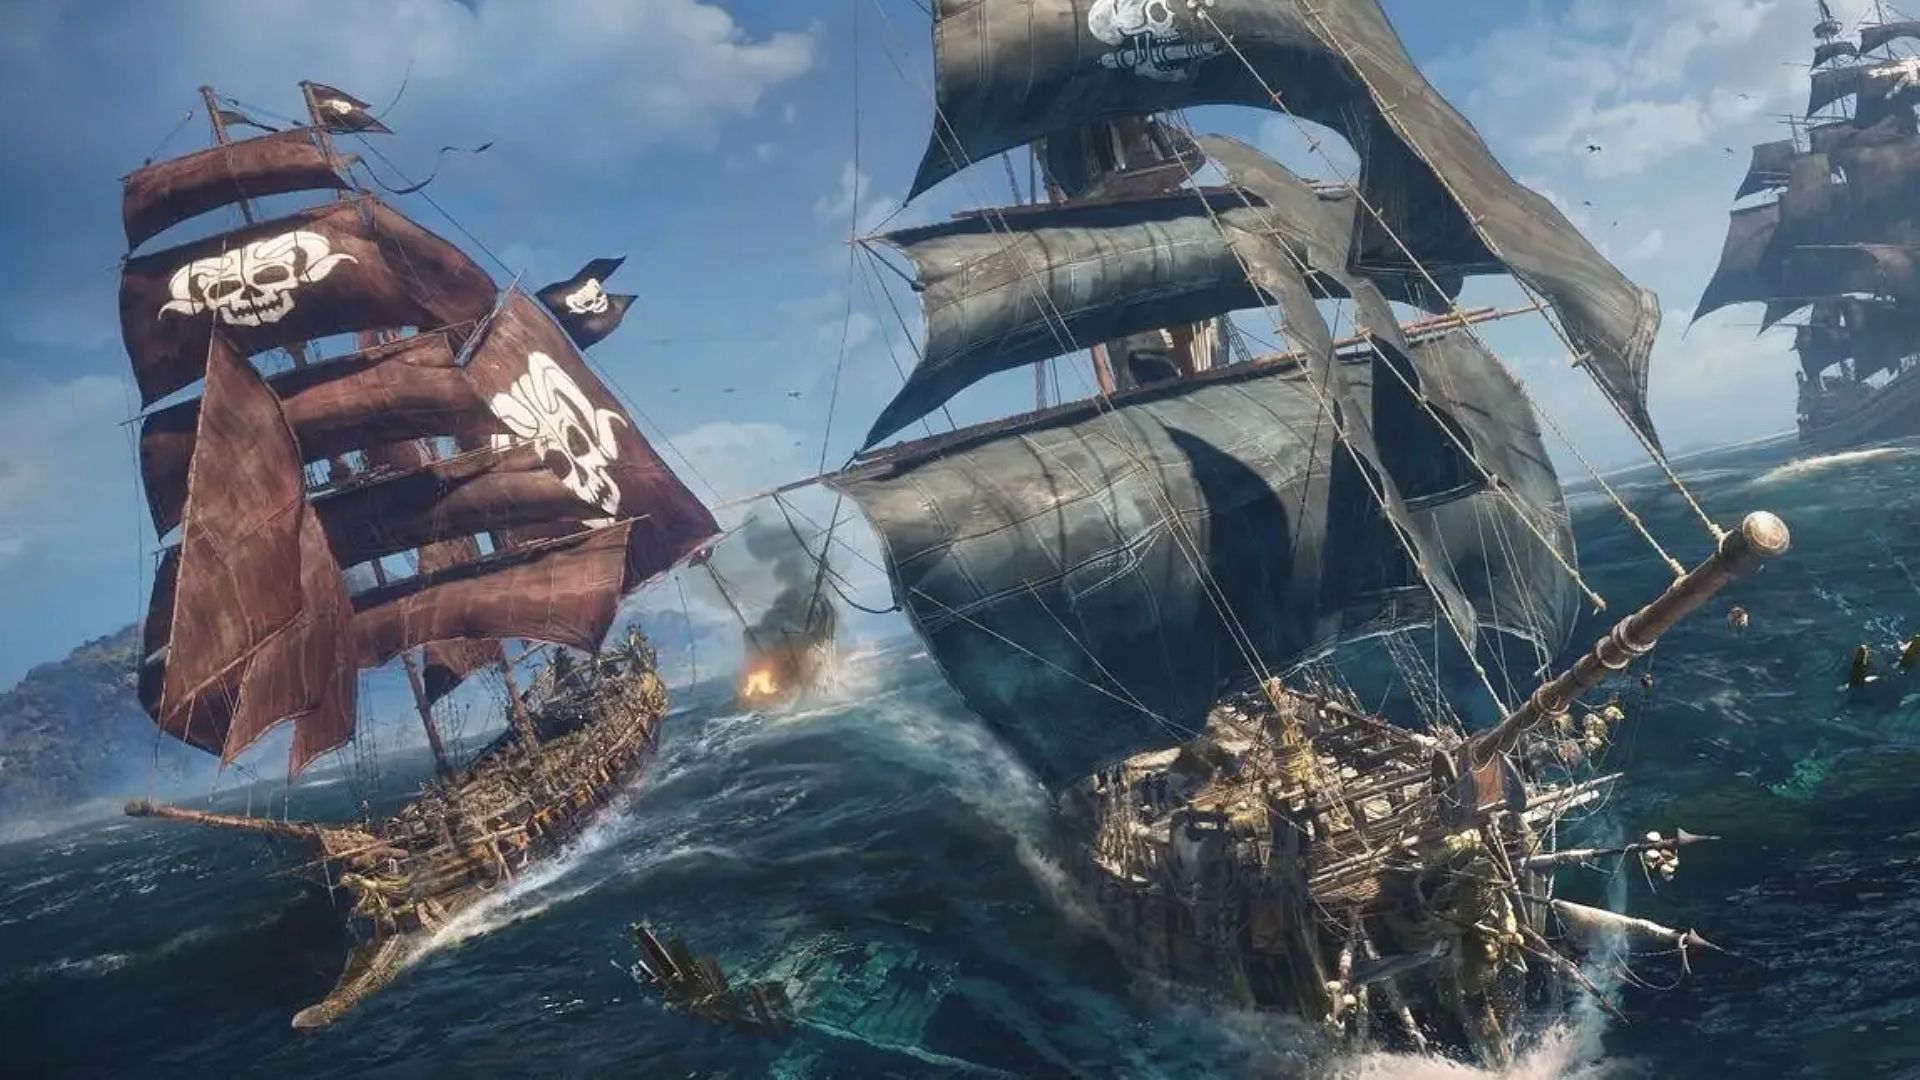 Ships shooting at each other in Skull and Bones